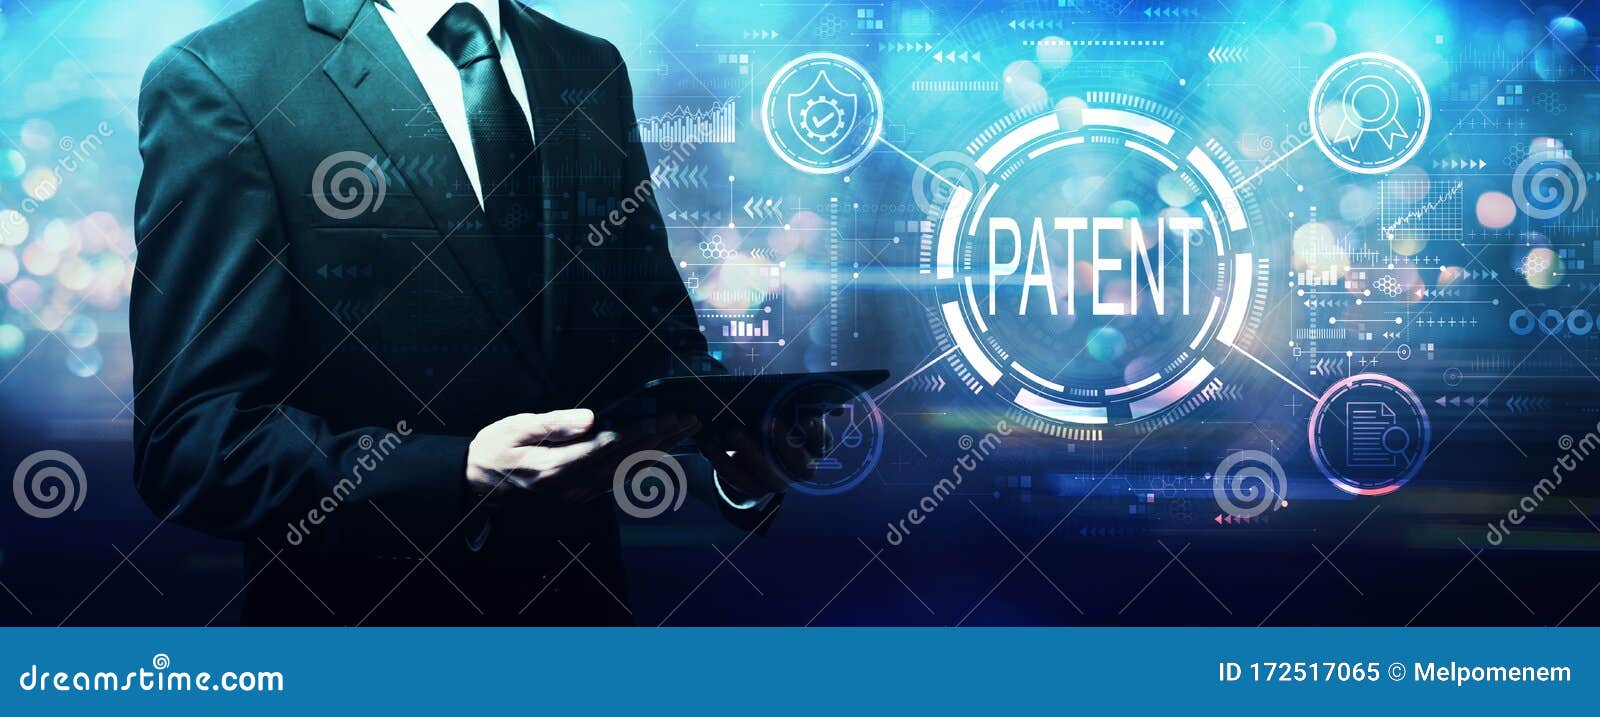 patent concept with businessman